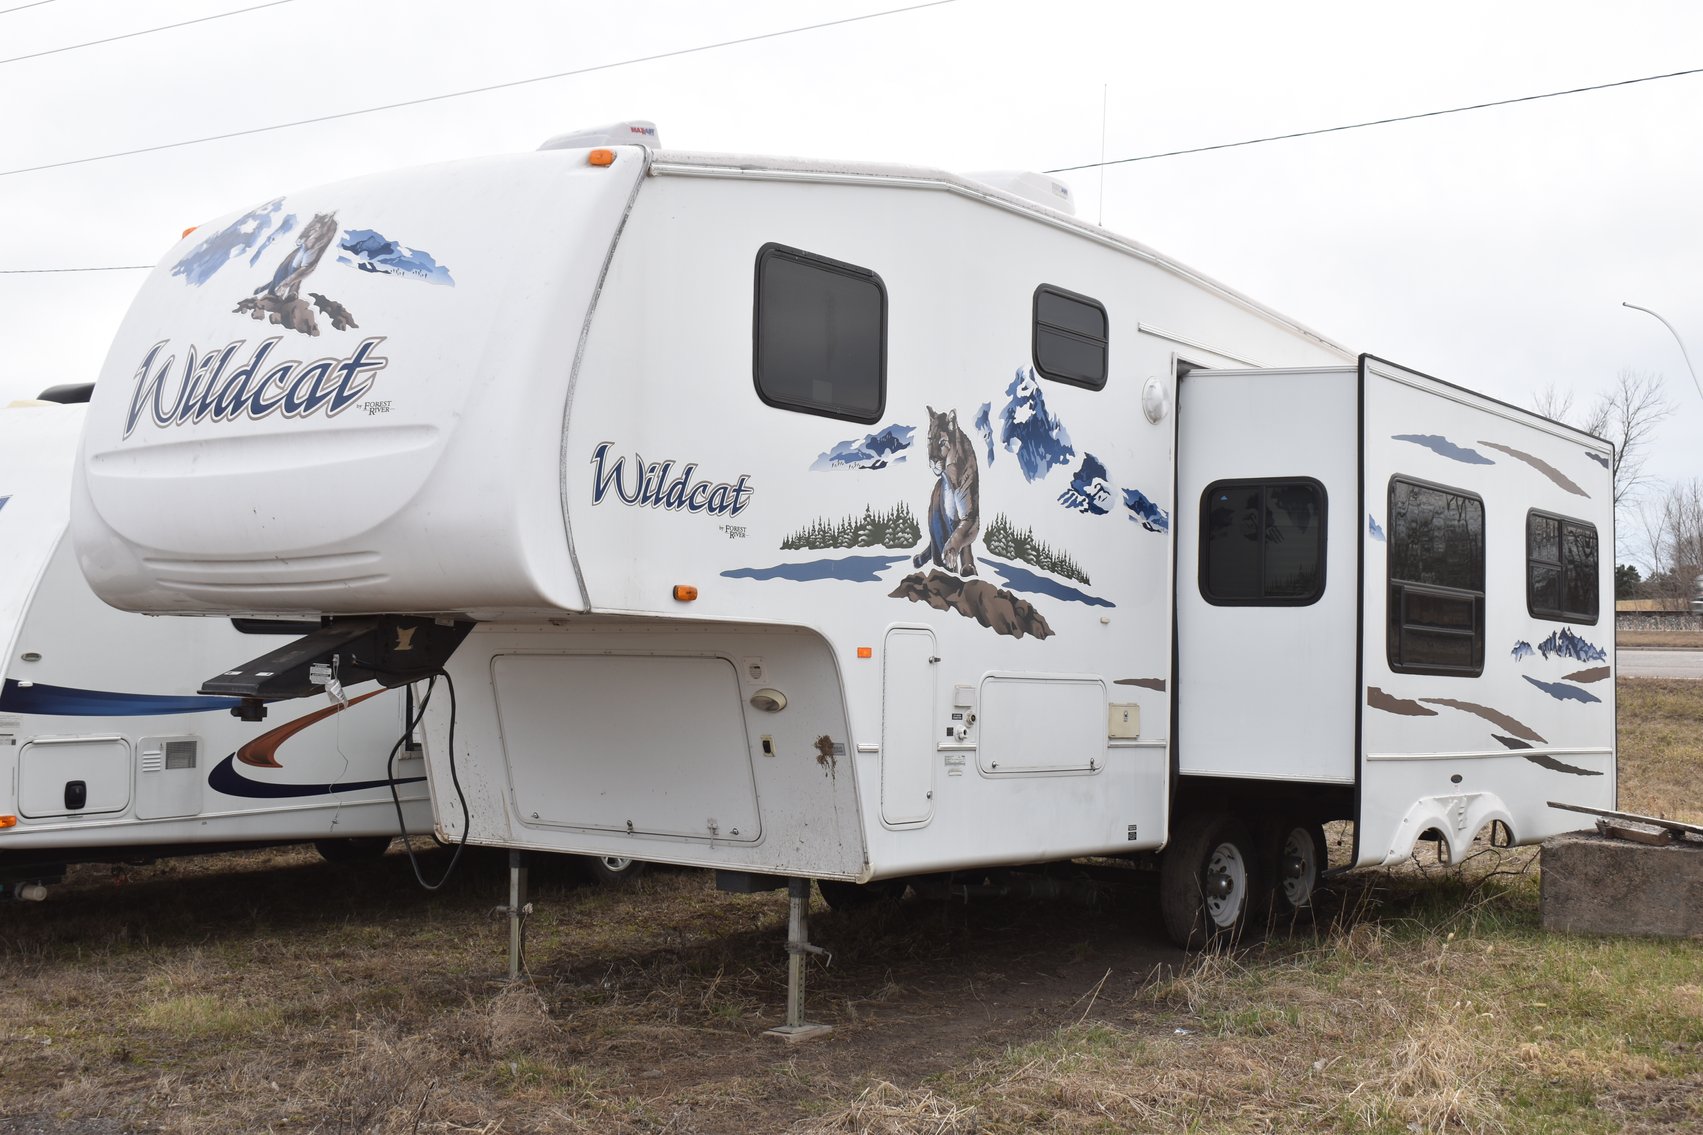 10 Campers: (5) 5th Wheels and (5) Travel Trailers